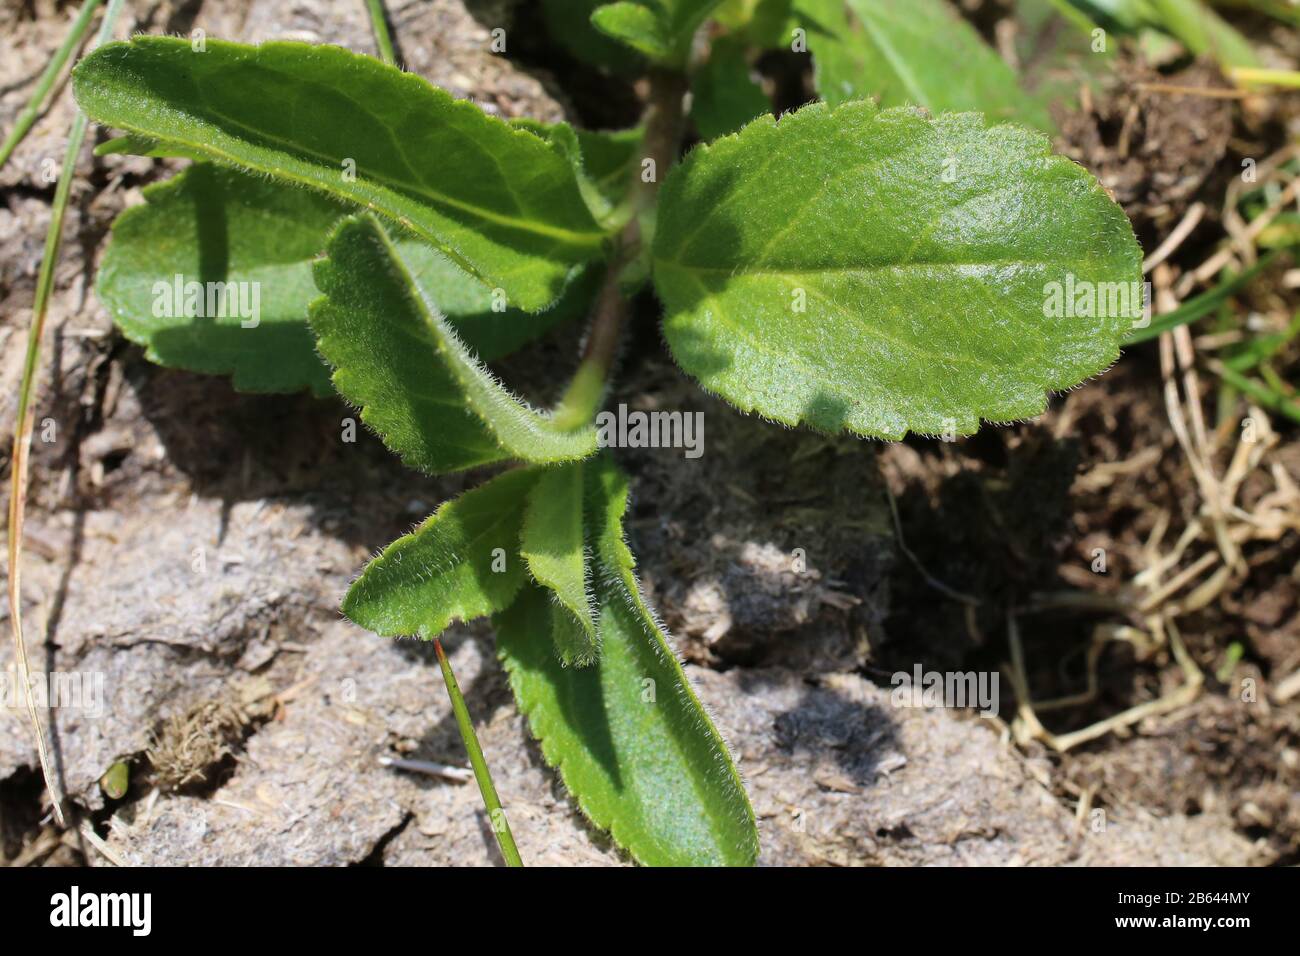 Veronica officinalis - Wild plant shot in summer. Stock Photo